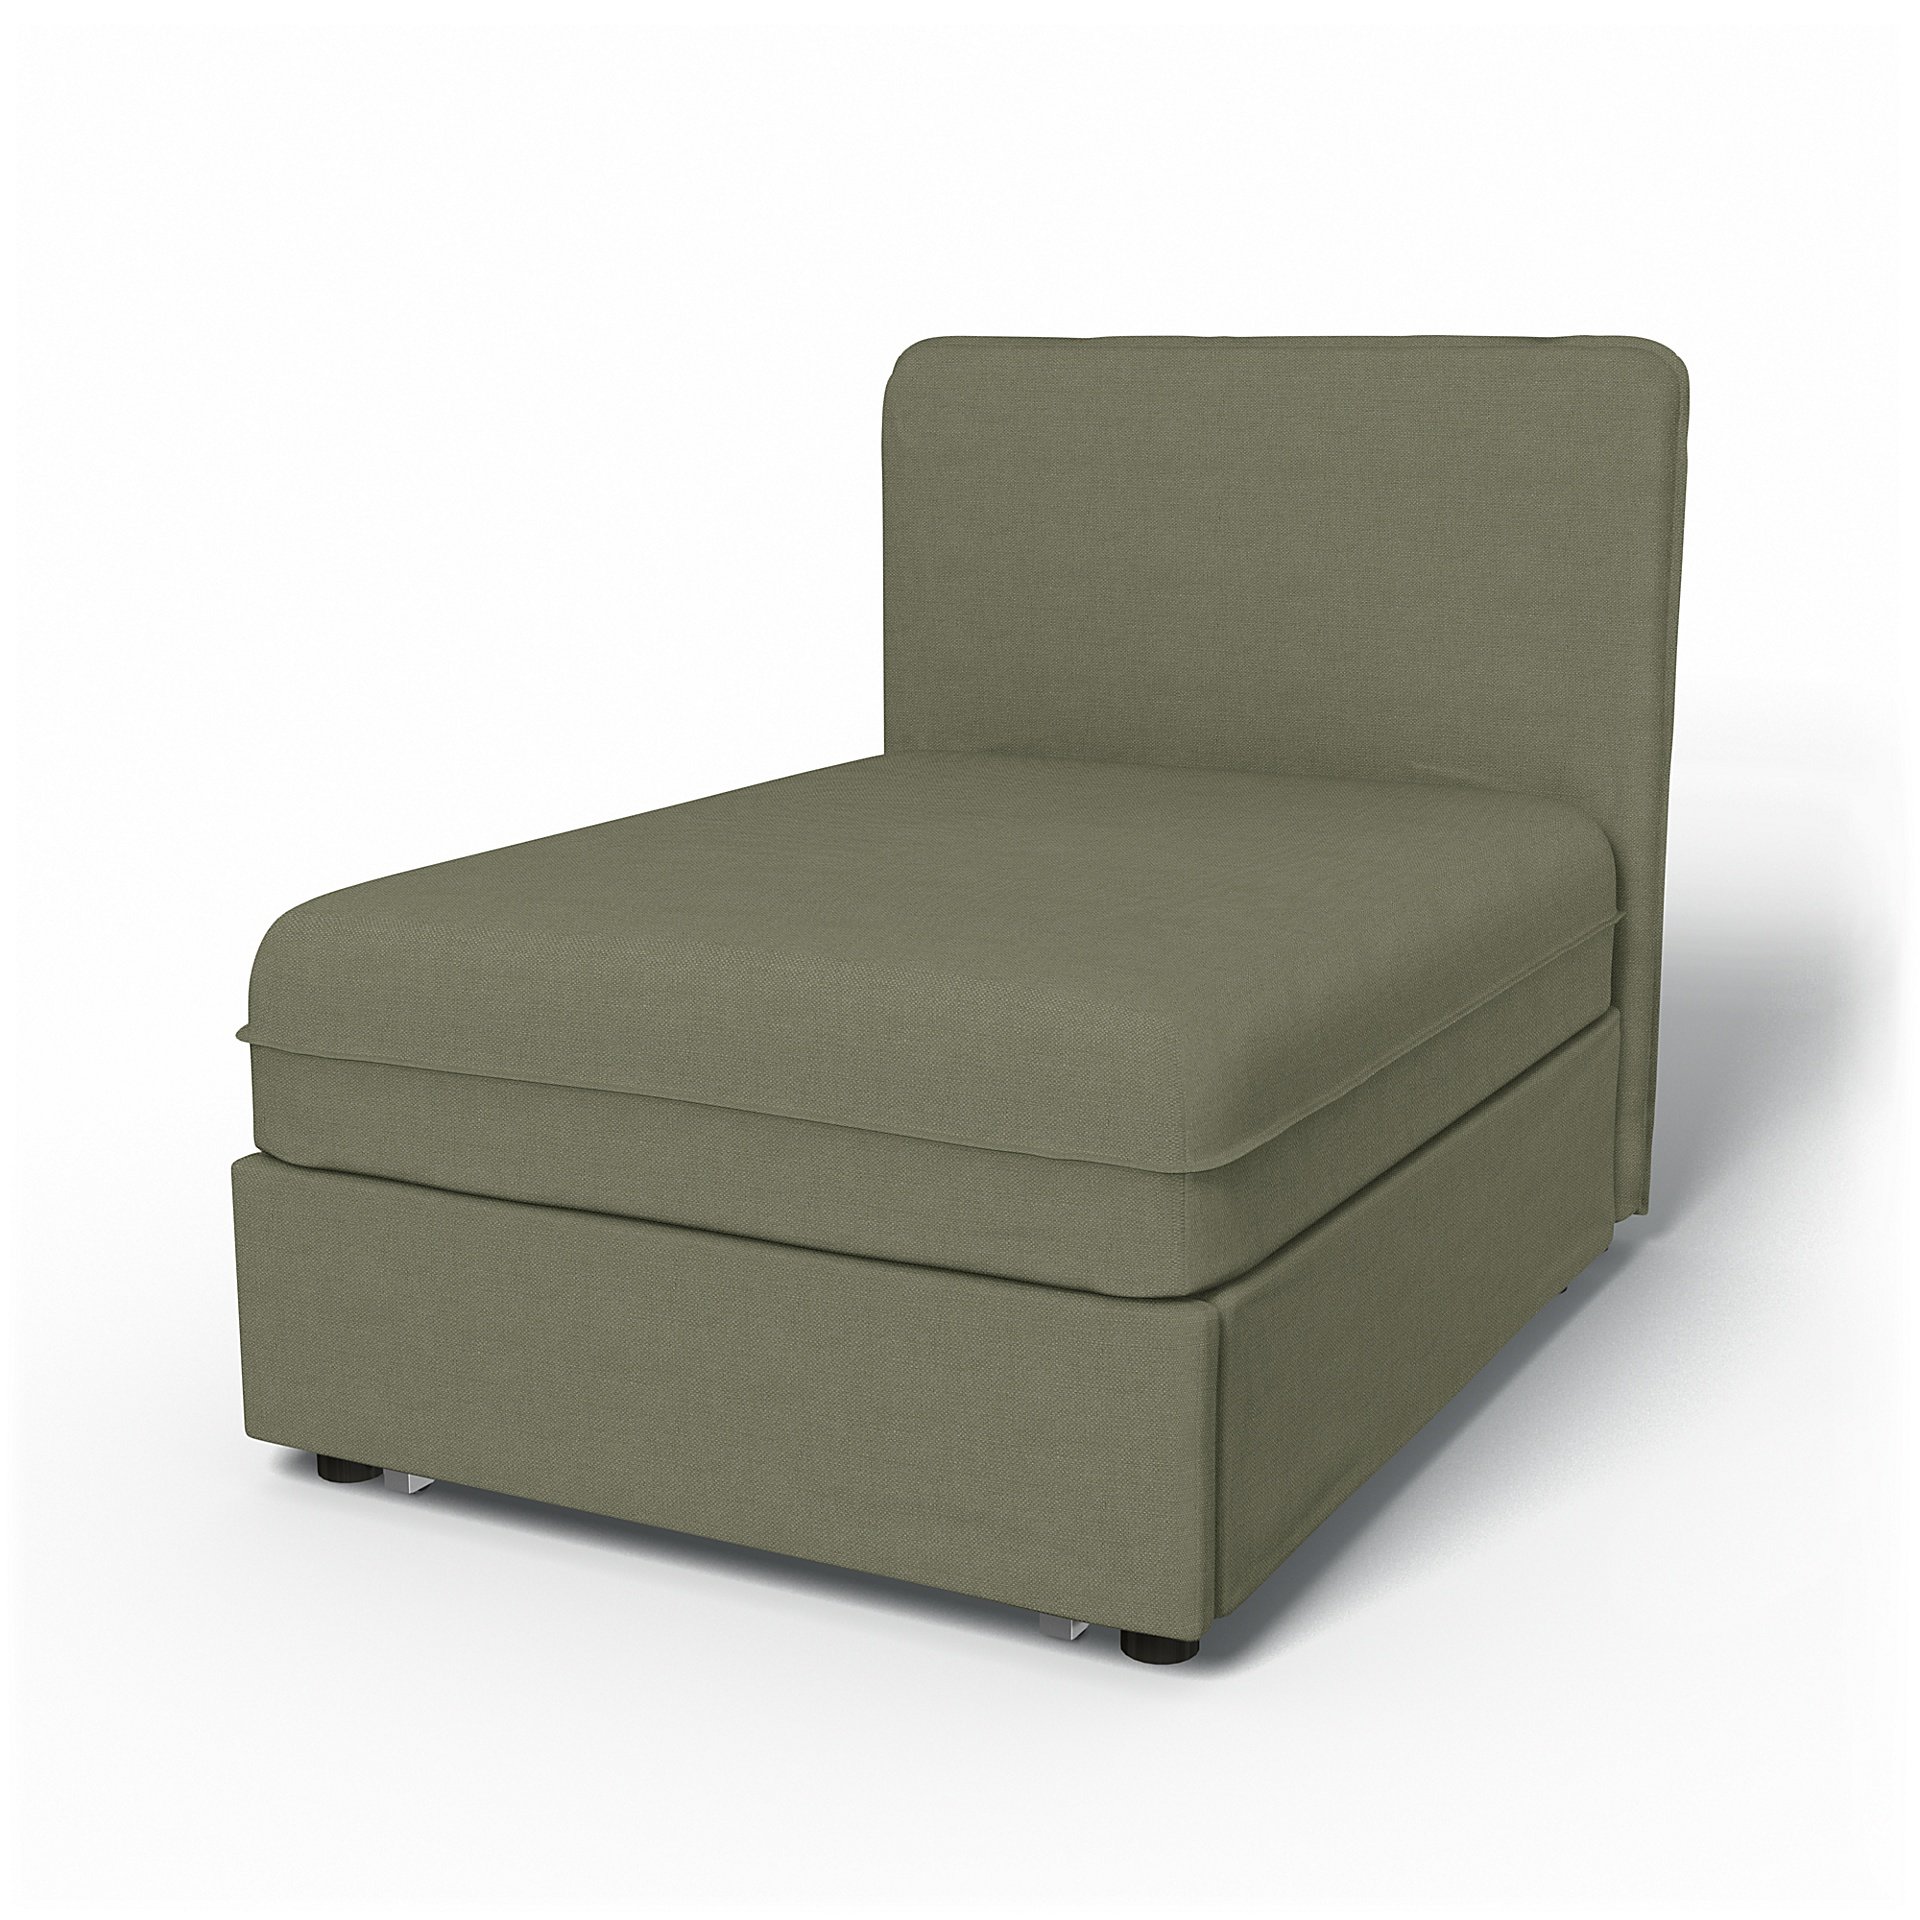 IKEA - Vallentuna Seat Module with Low Back Sofa Bed Cover 80x100 cm 32x39in, Sage, Linen - Bemz